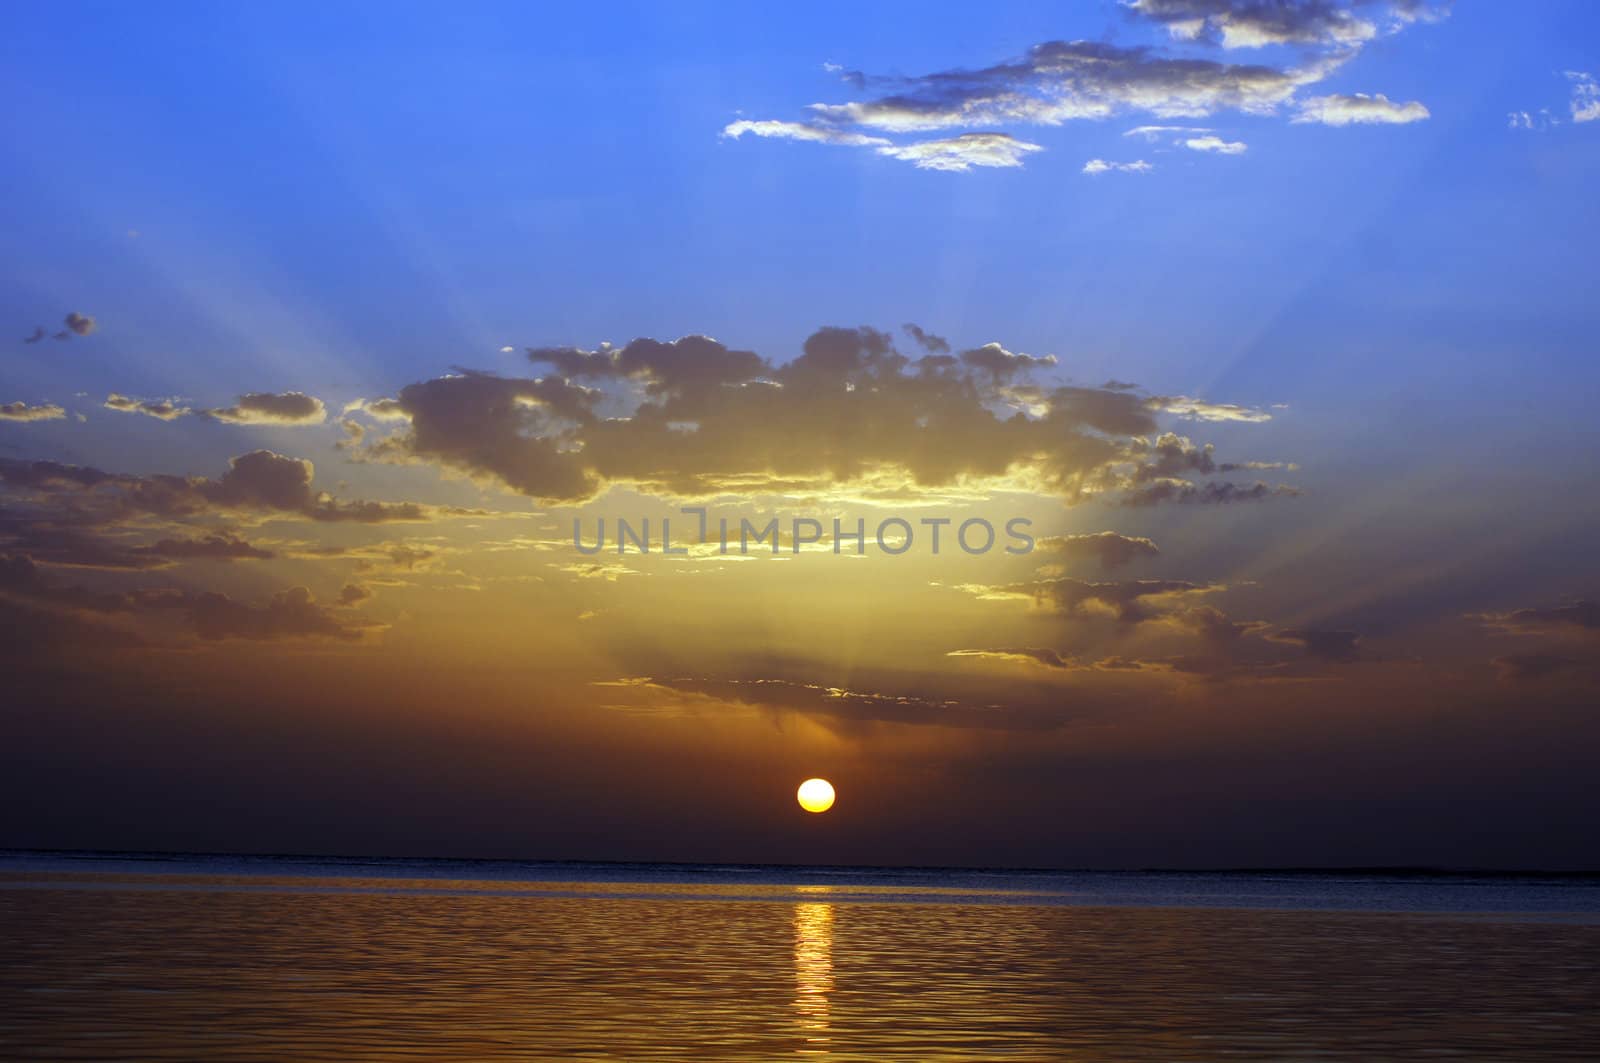 Sunrise over the Red sea in Egypt                 